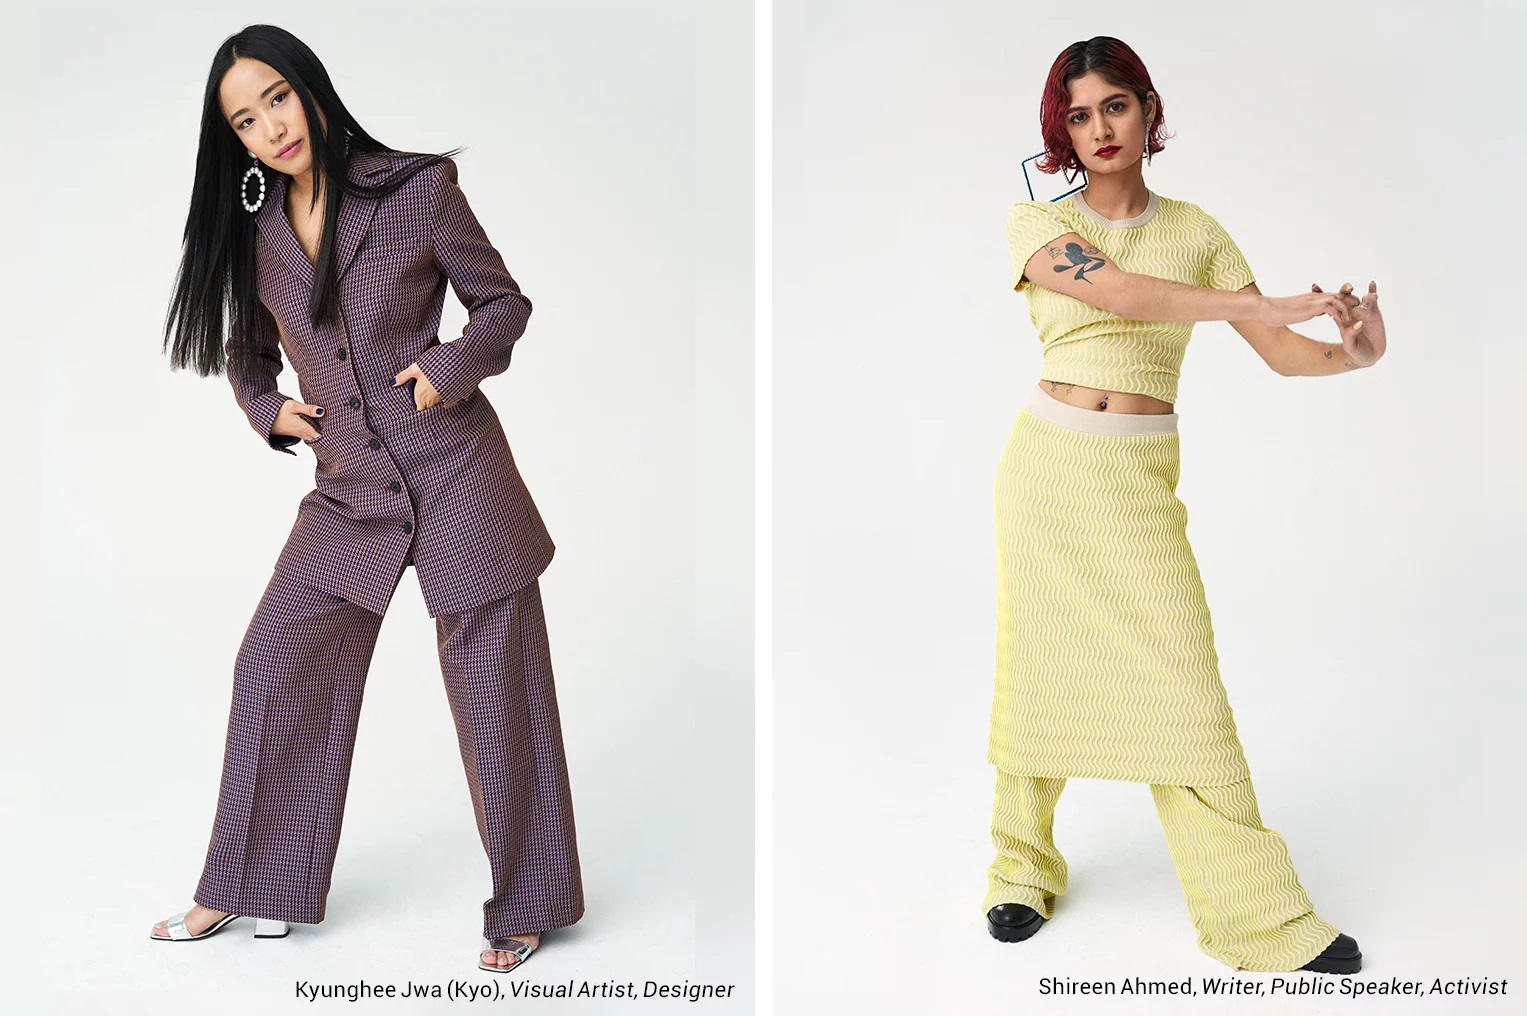 opening ceremony fall winter 2019 lookbook features an all-asian cast inspired by hong kong icons anita mui and leslie cheung - 08.jpg